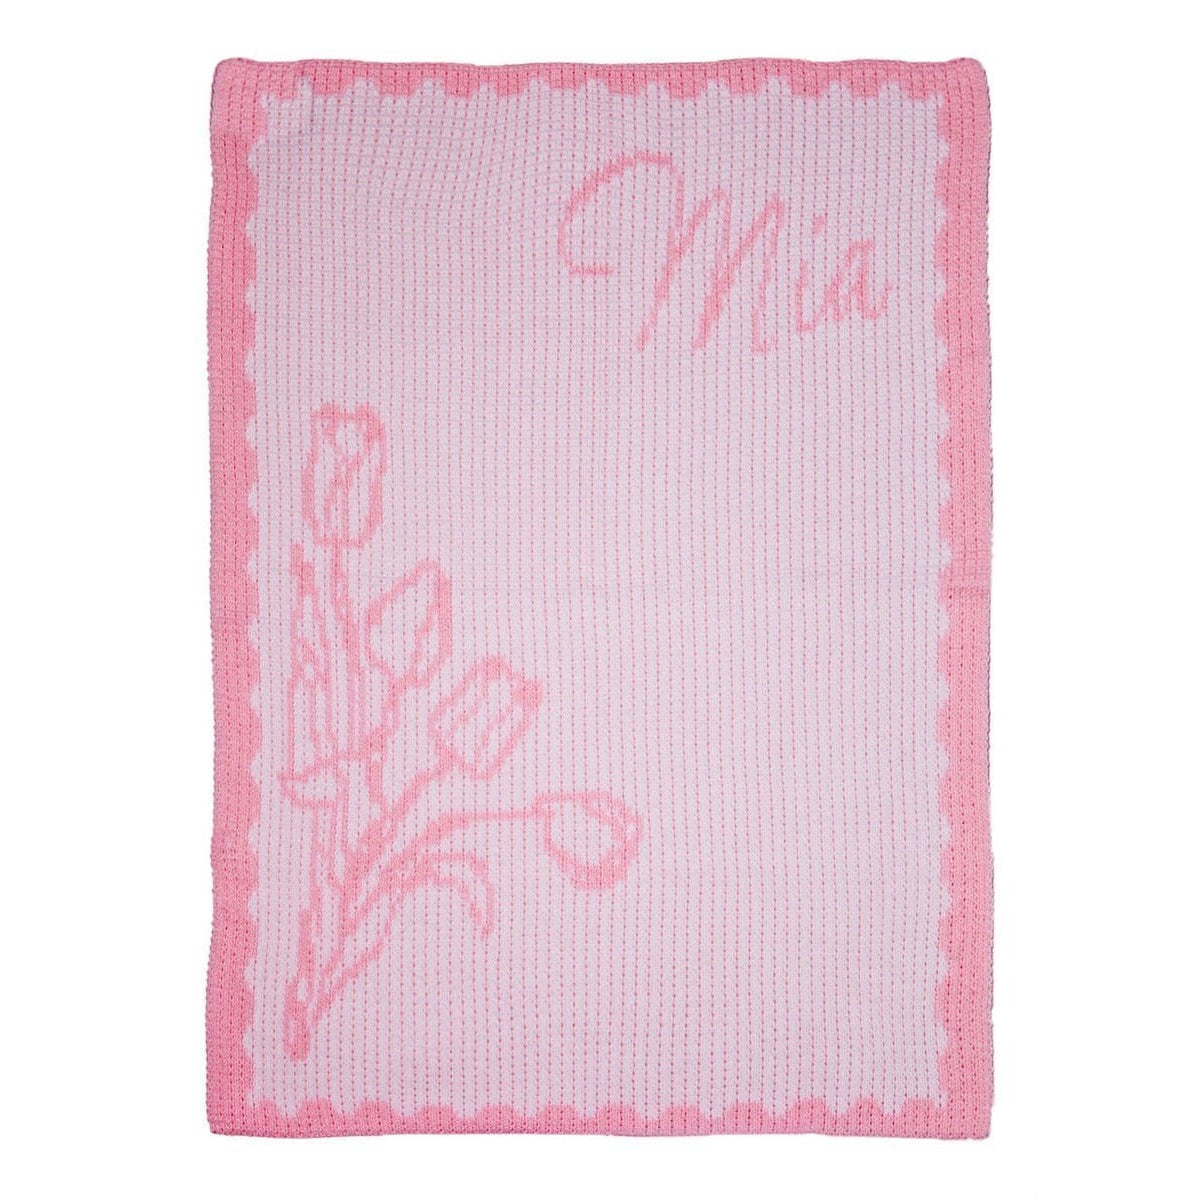 Tulips & Name Personalized Stroller Blanket or Baby Blanket-Baby Blanket-Jack and Jill Boutique